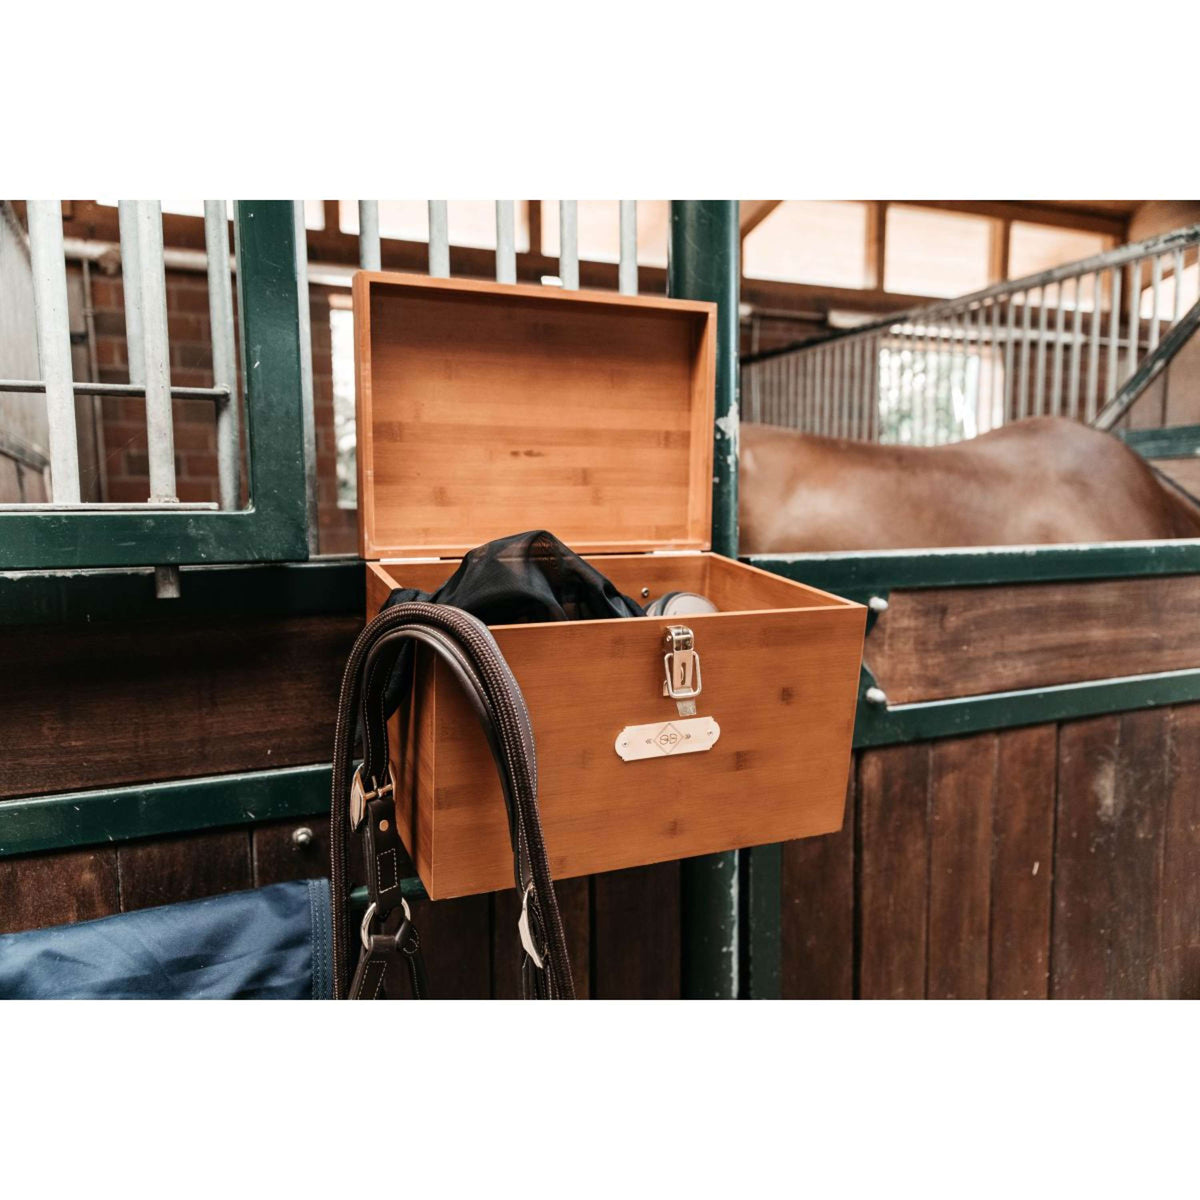 Grooming Deluxe by Kentucky Stable Tack Box